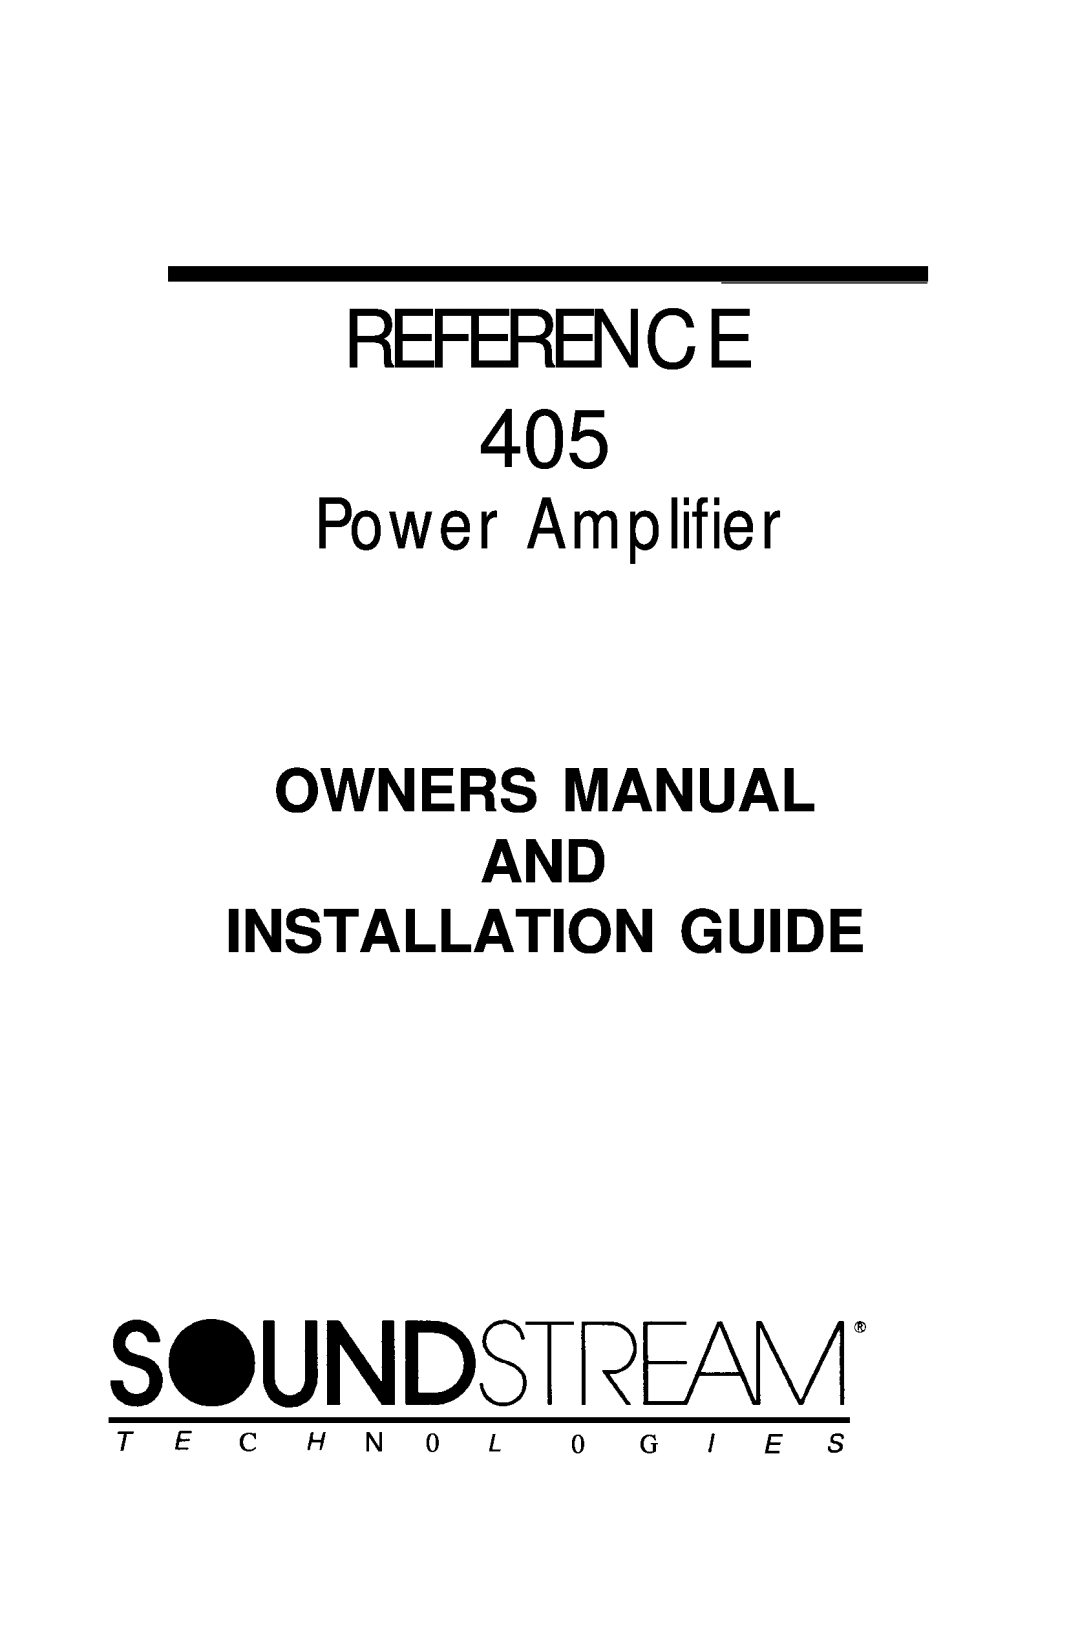 Soundstream Technologies REFERENCE 405 owner manual Power Amplifier, T E C H N 0 L 0 G I E S, Soundstream@ 